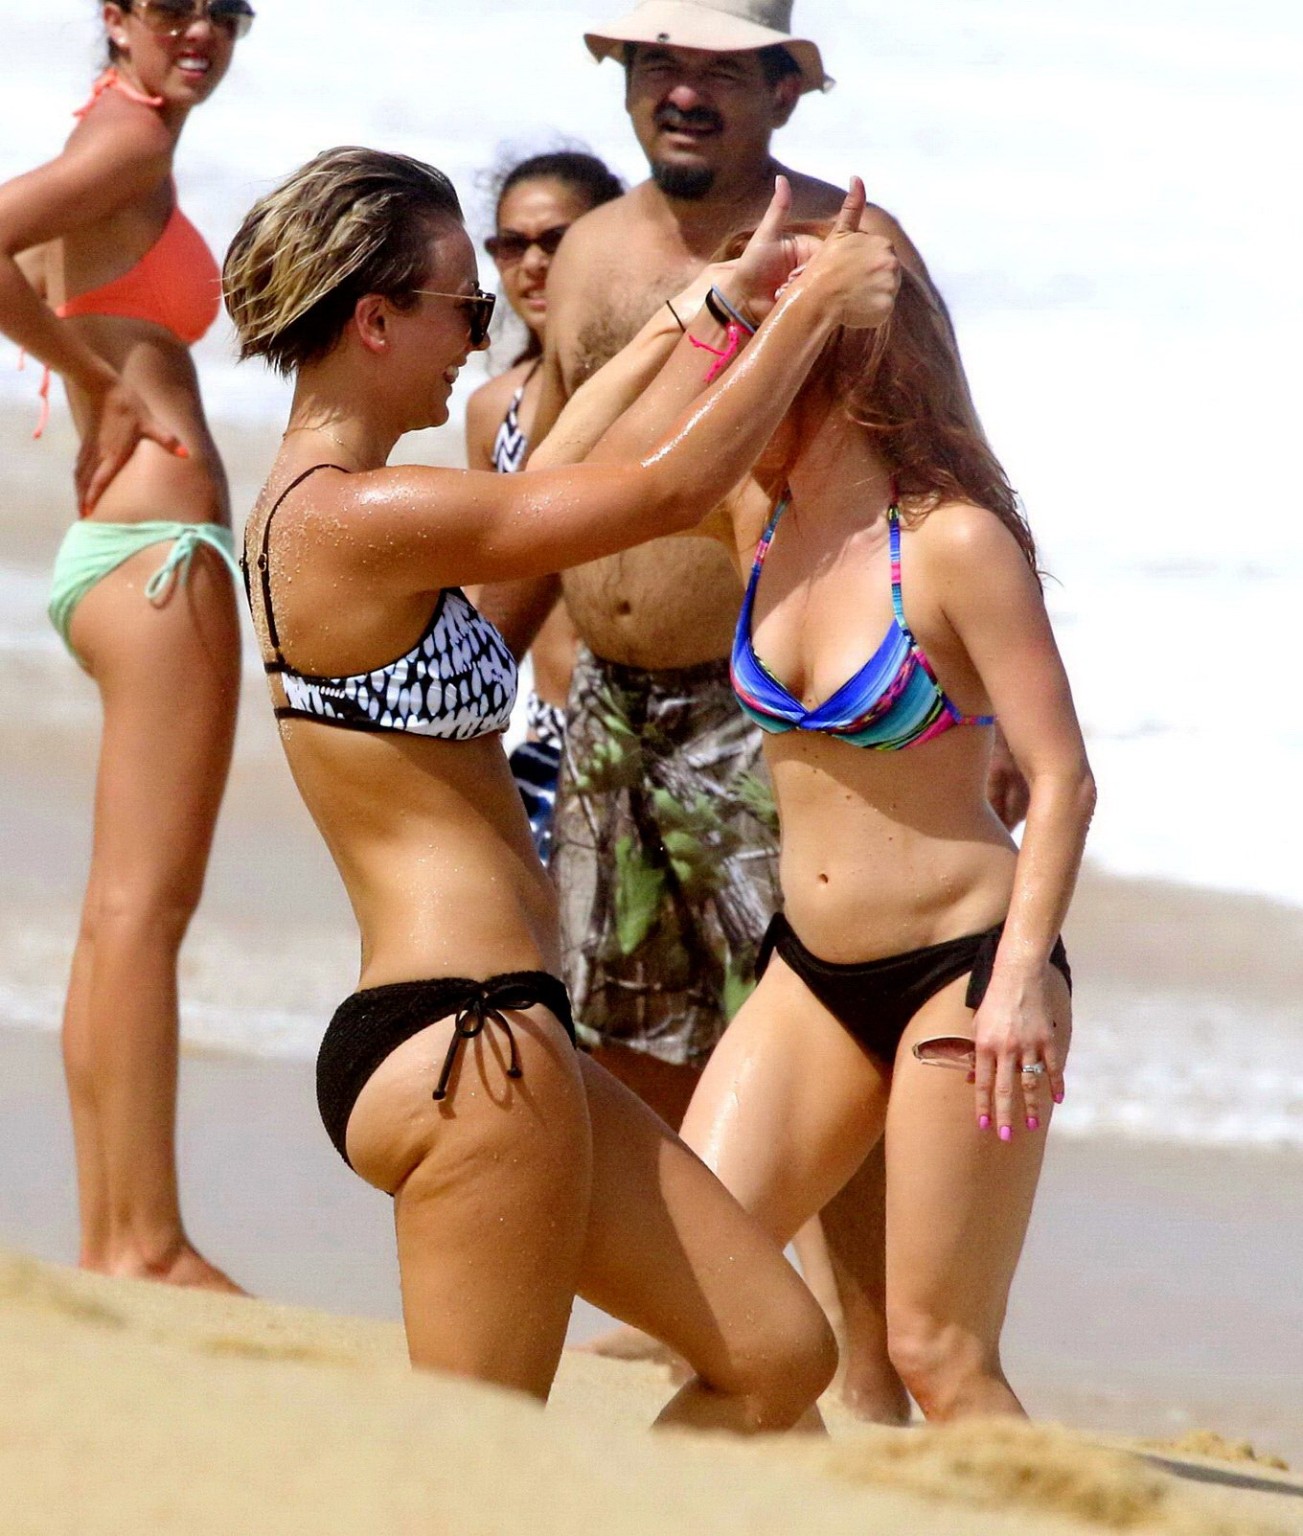 Kaley Cuoco shows off her ass wearing a monochrome bikini on a beach in Mexico #75191924